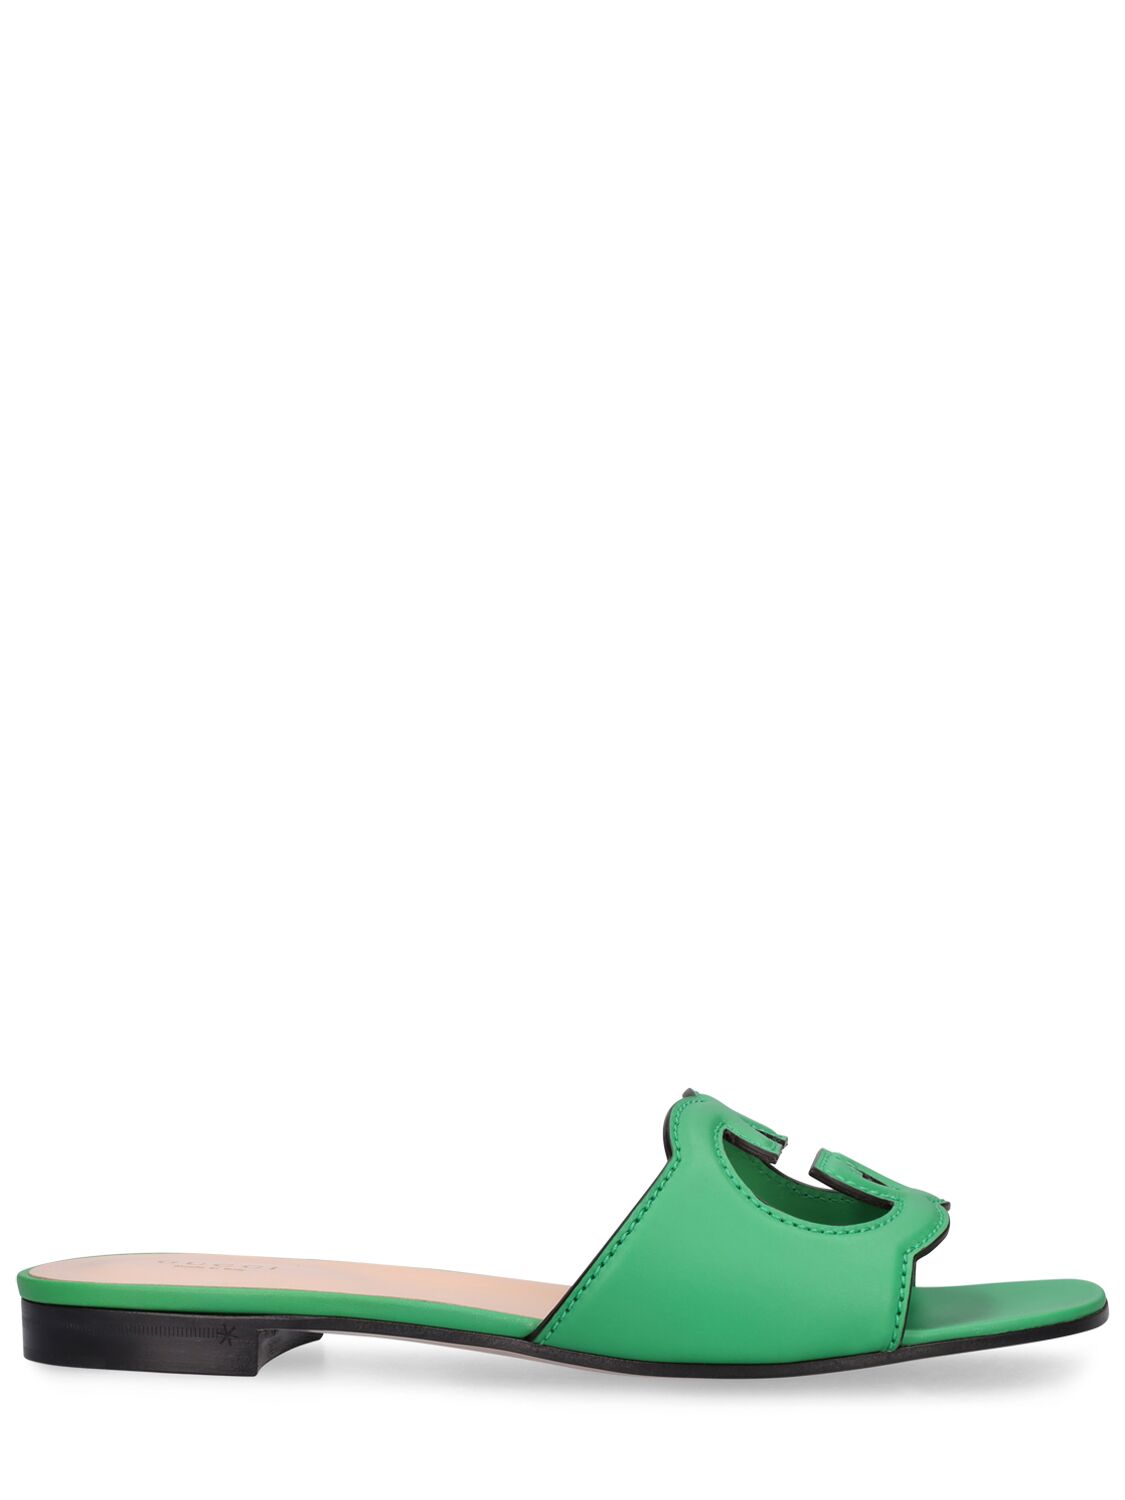 Gucci 20mm Gg Cutout Leather Slide Sandals In Green